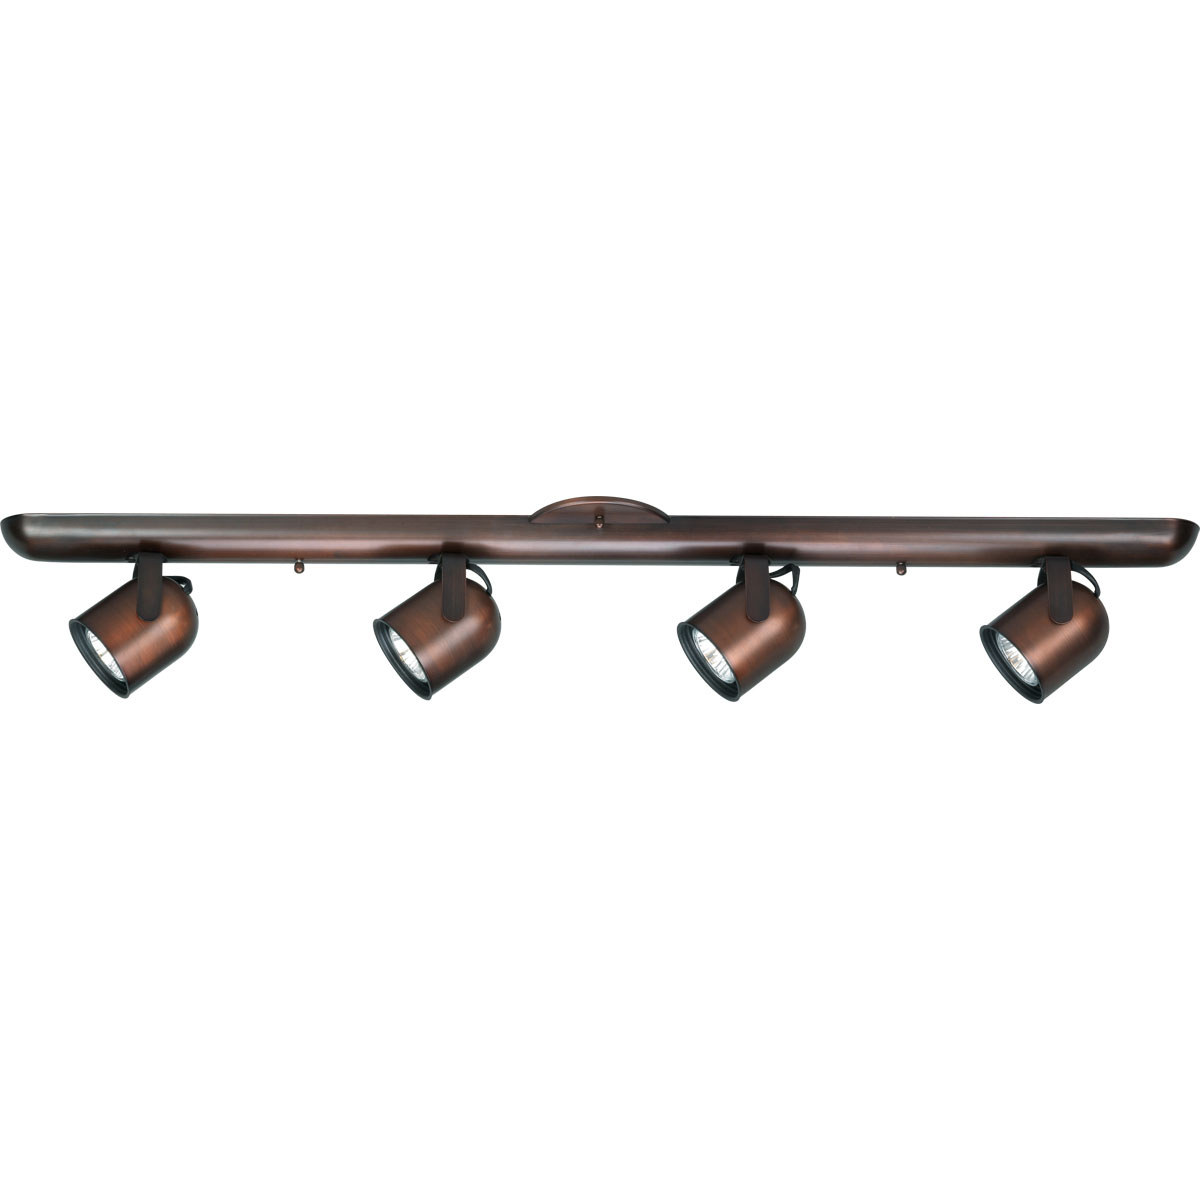 Four-light round back wall or ceiling mount directional. Transitional design in an Urban Bronze finish will be a stylish complement to your decor. Four independently adjustable track heads to direct and focus light where needed - track heads rotate 350-degrees and has a 60-degree tilt. MR16 bulbs included.